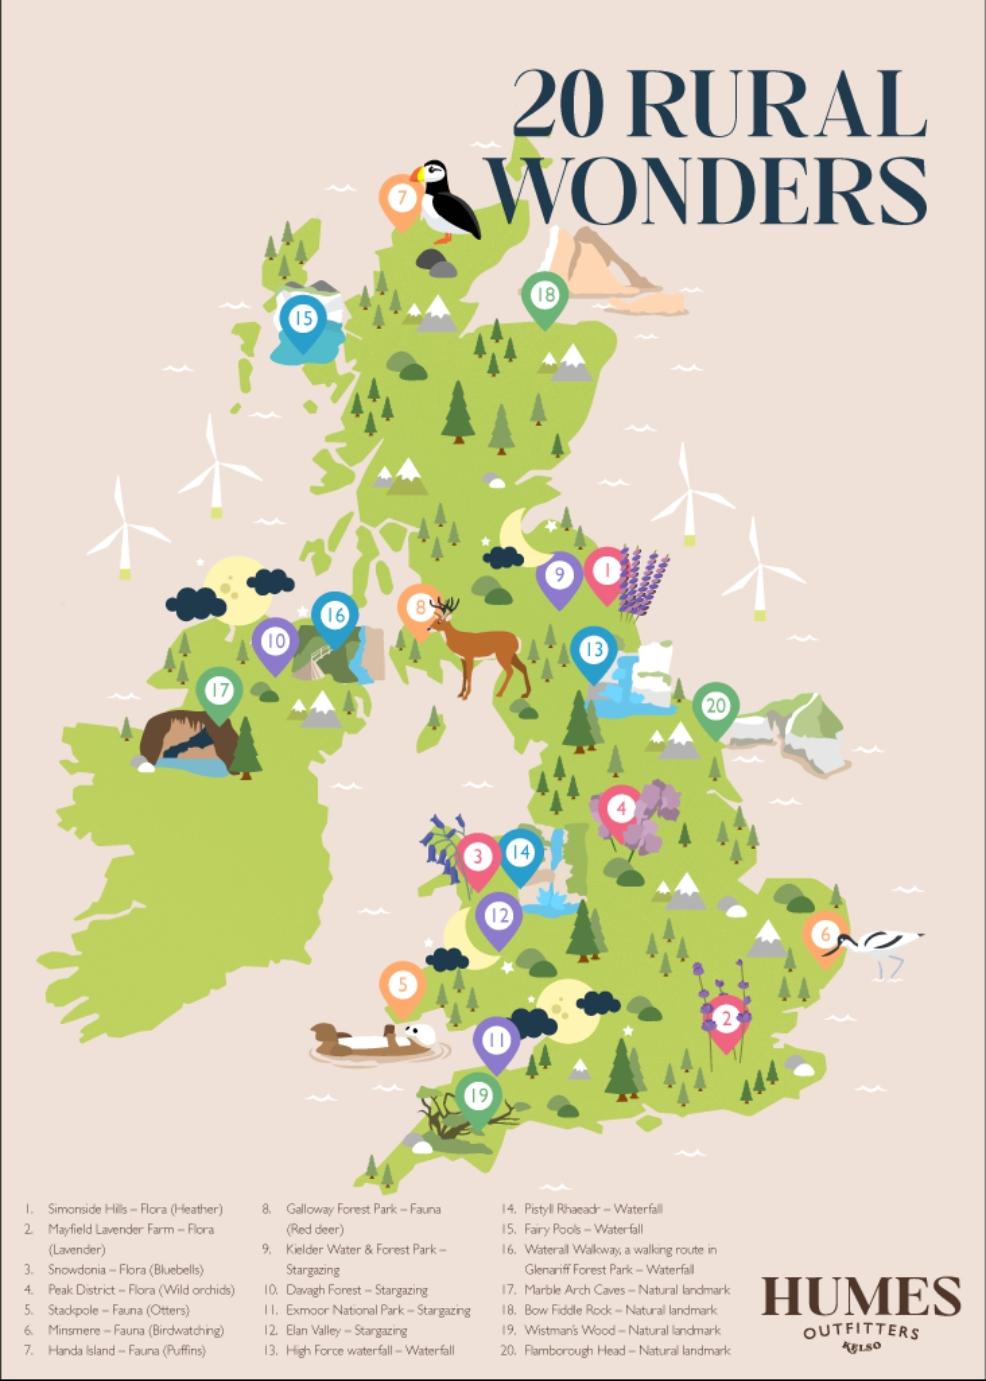 picture of a map of 20 Rural Wonders by Humes Outfitters